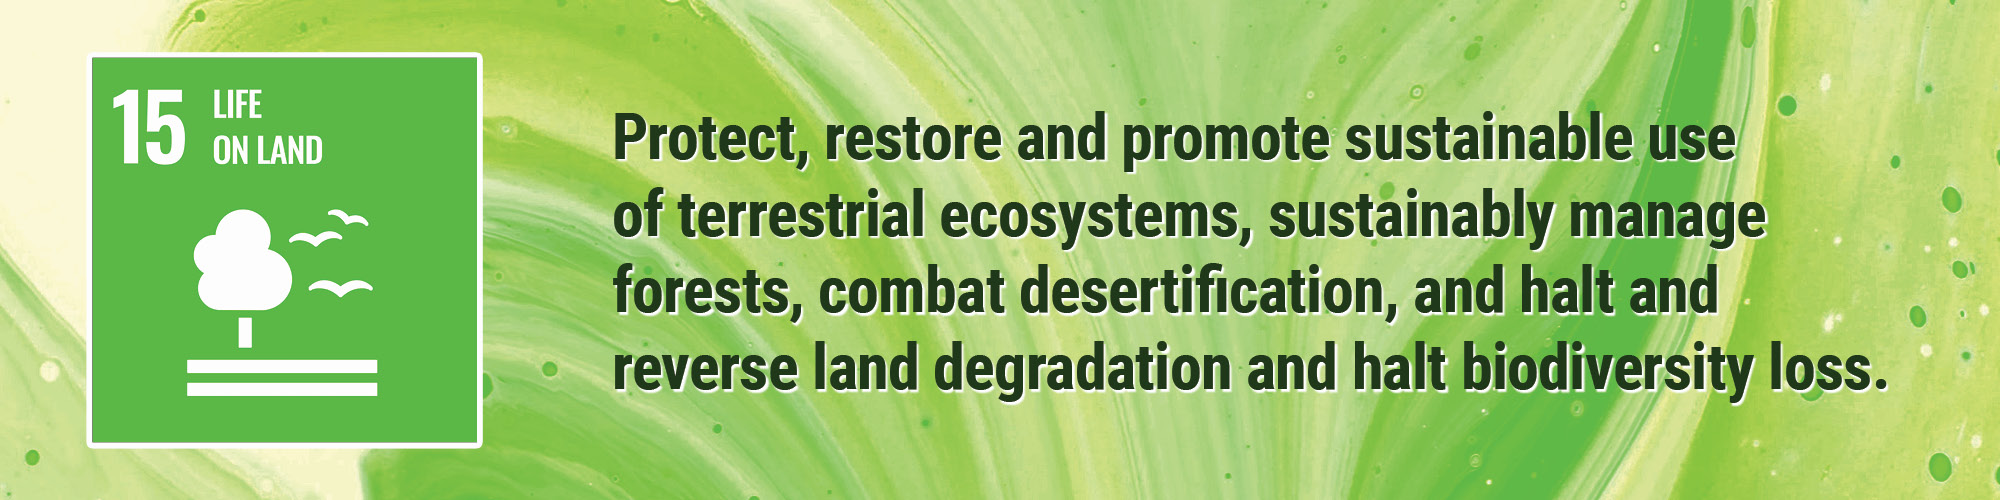 Protect, restore and promote sustainable use of terrestrial ecosystems, sustainably manage forests, combat desertification, and halt and reverse land degradation and halt biodiversity loss.